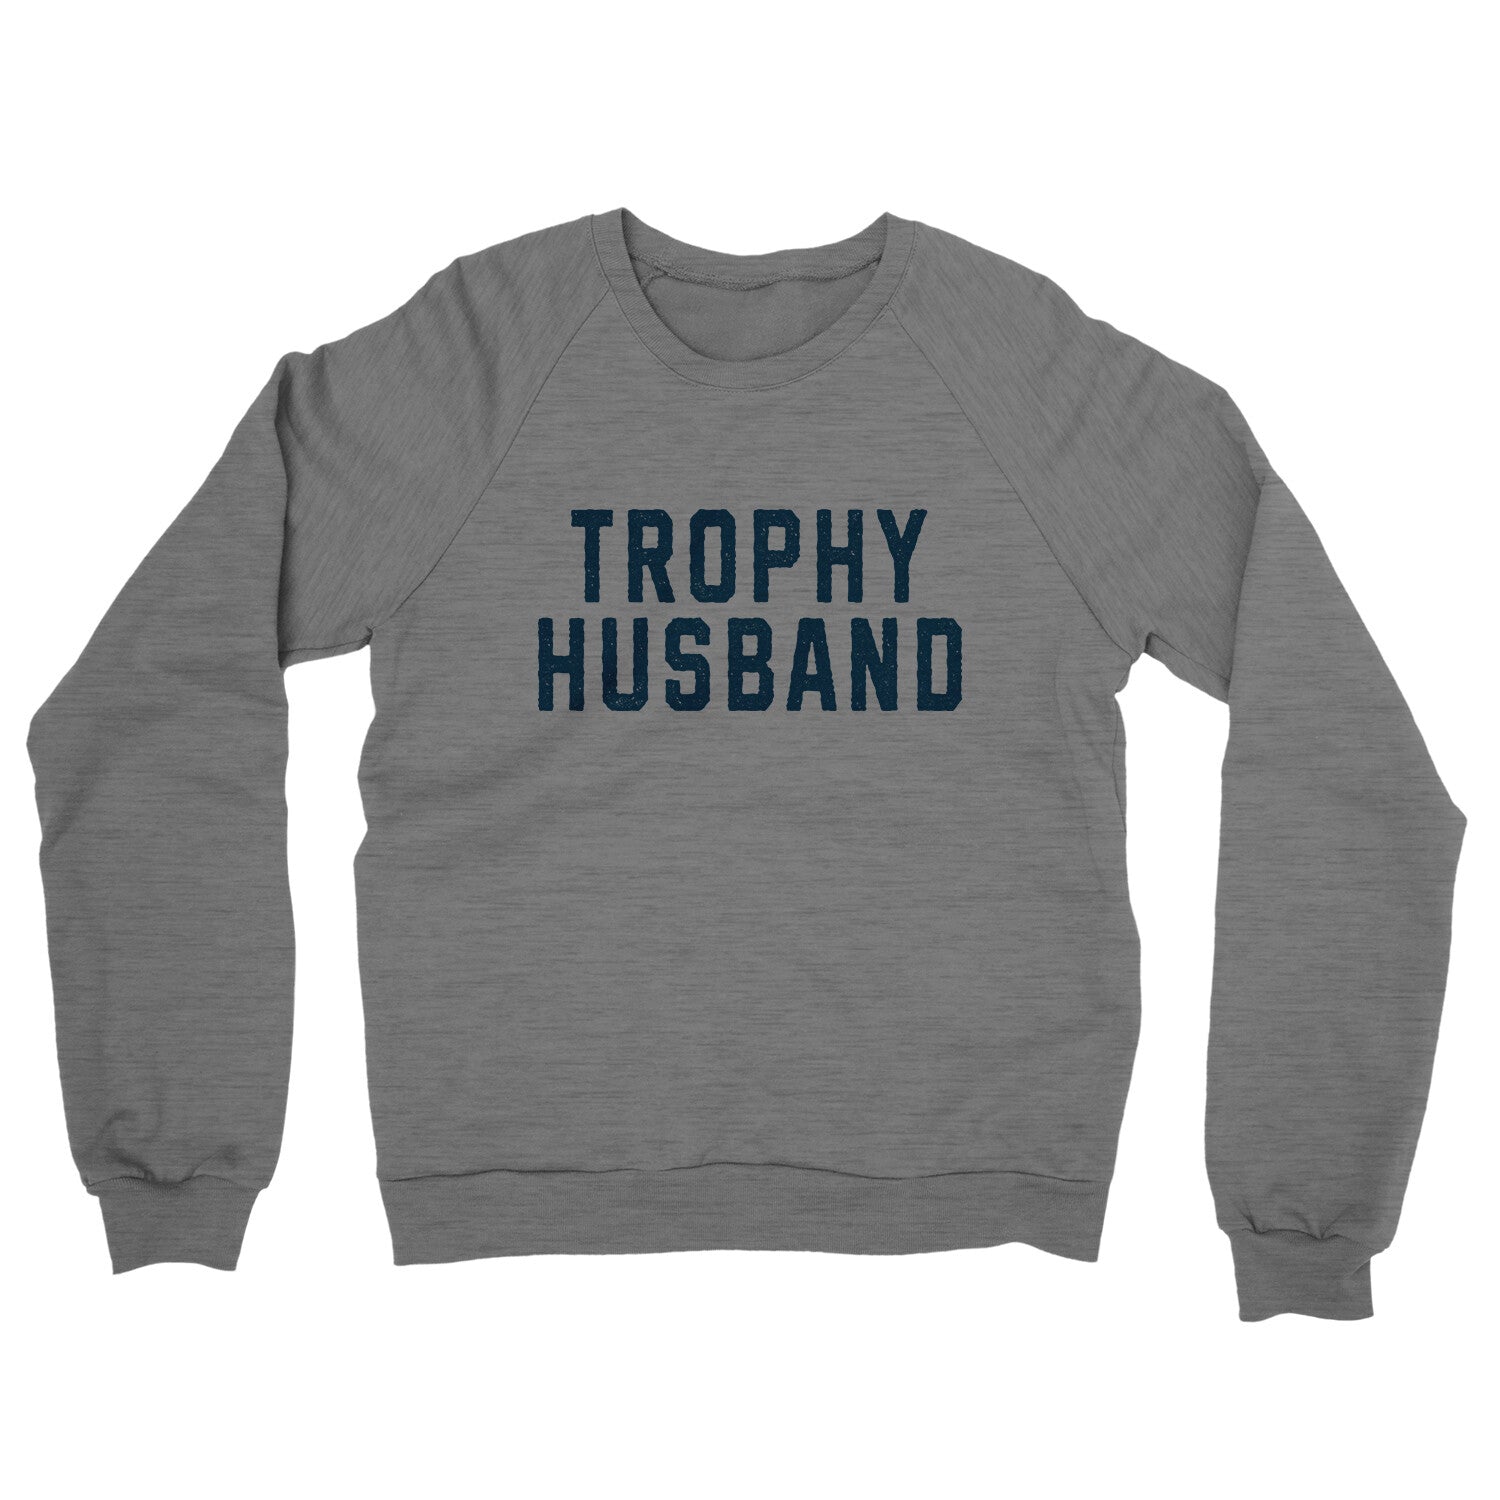 Trophy Husband in Graphite Heather Color